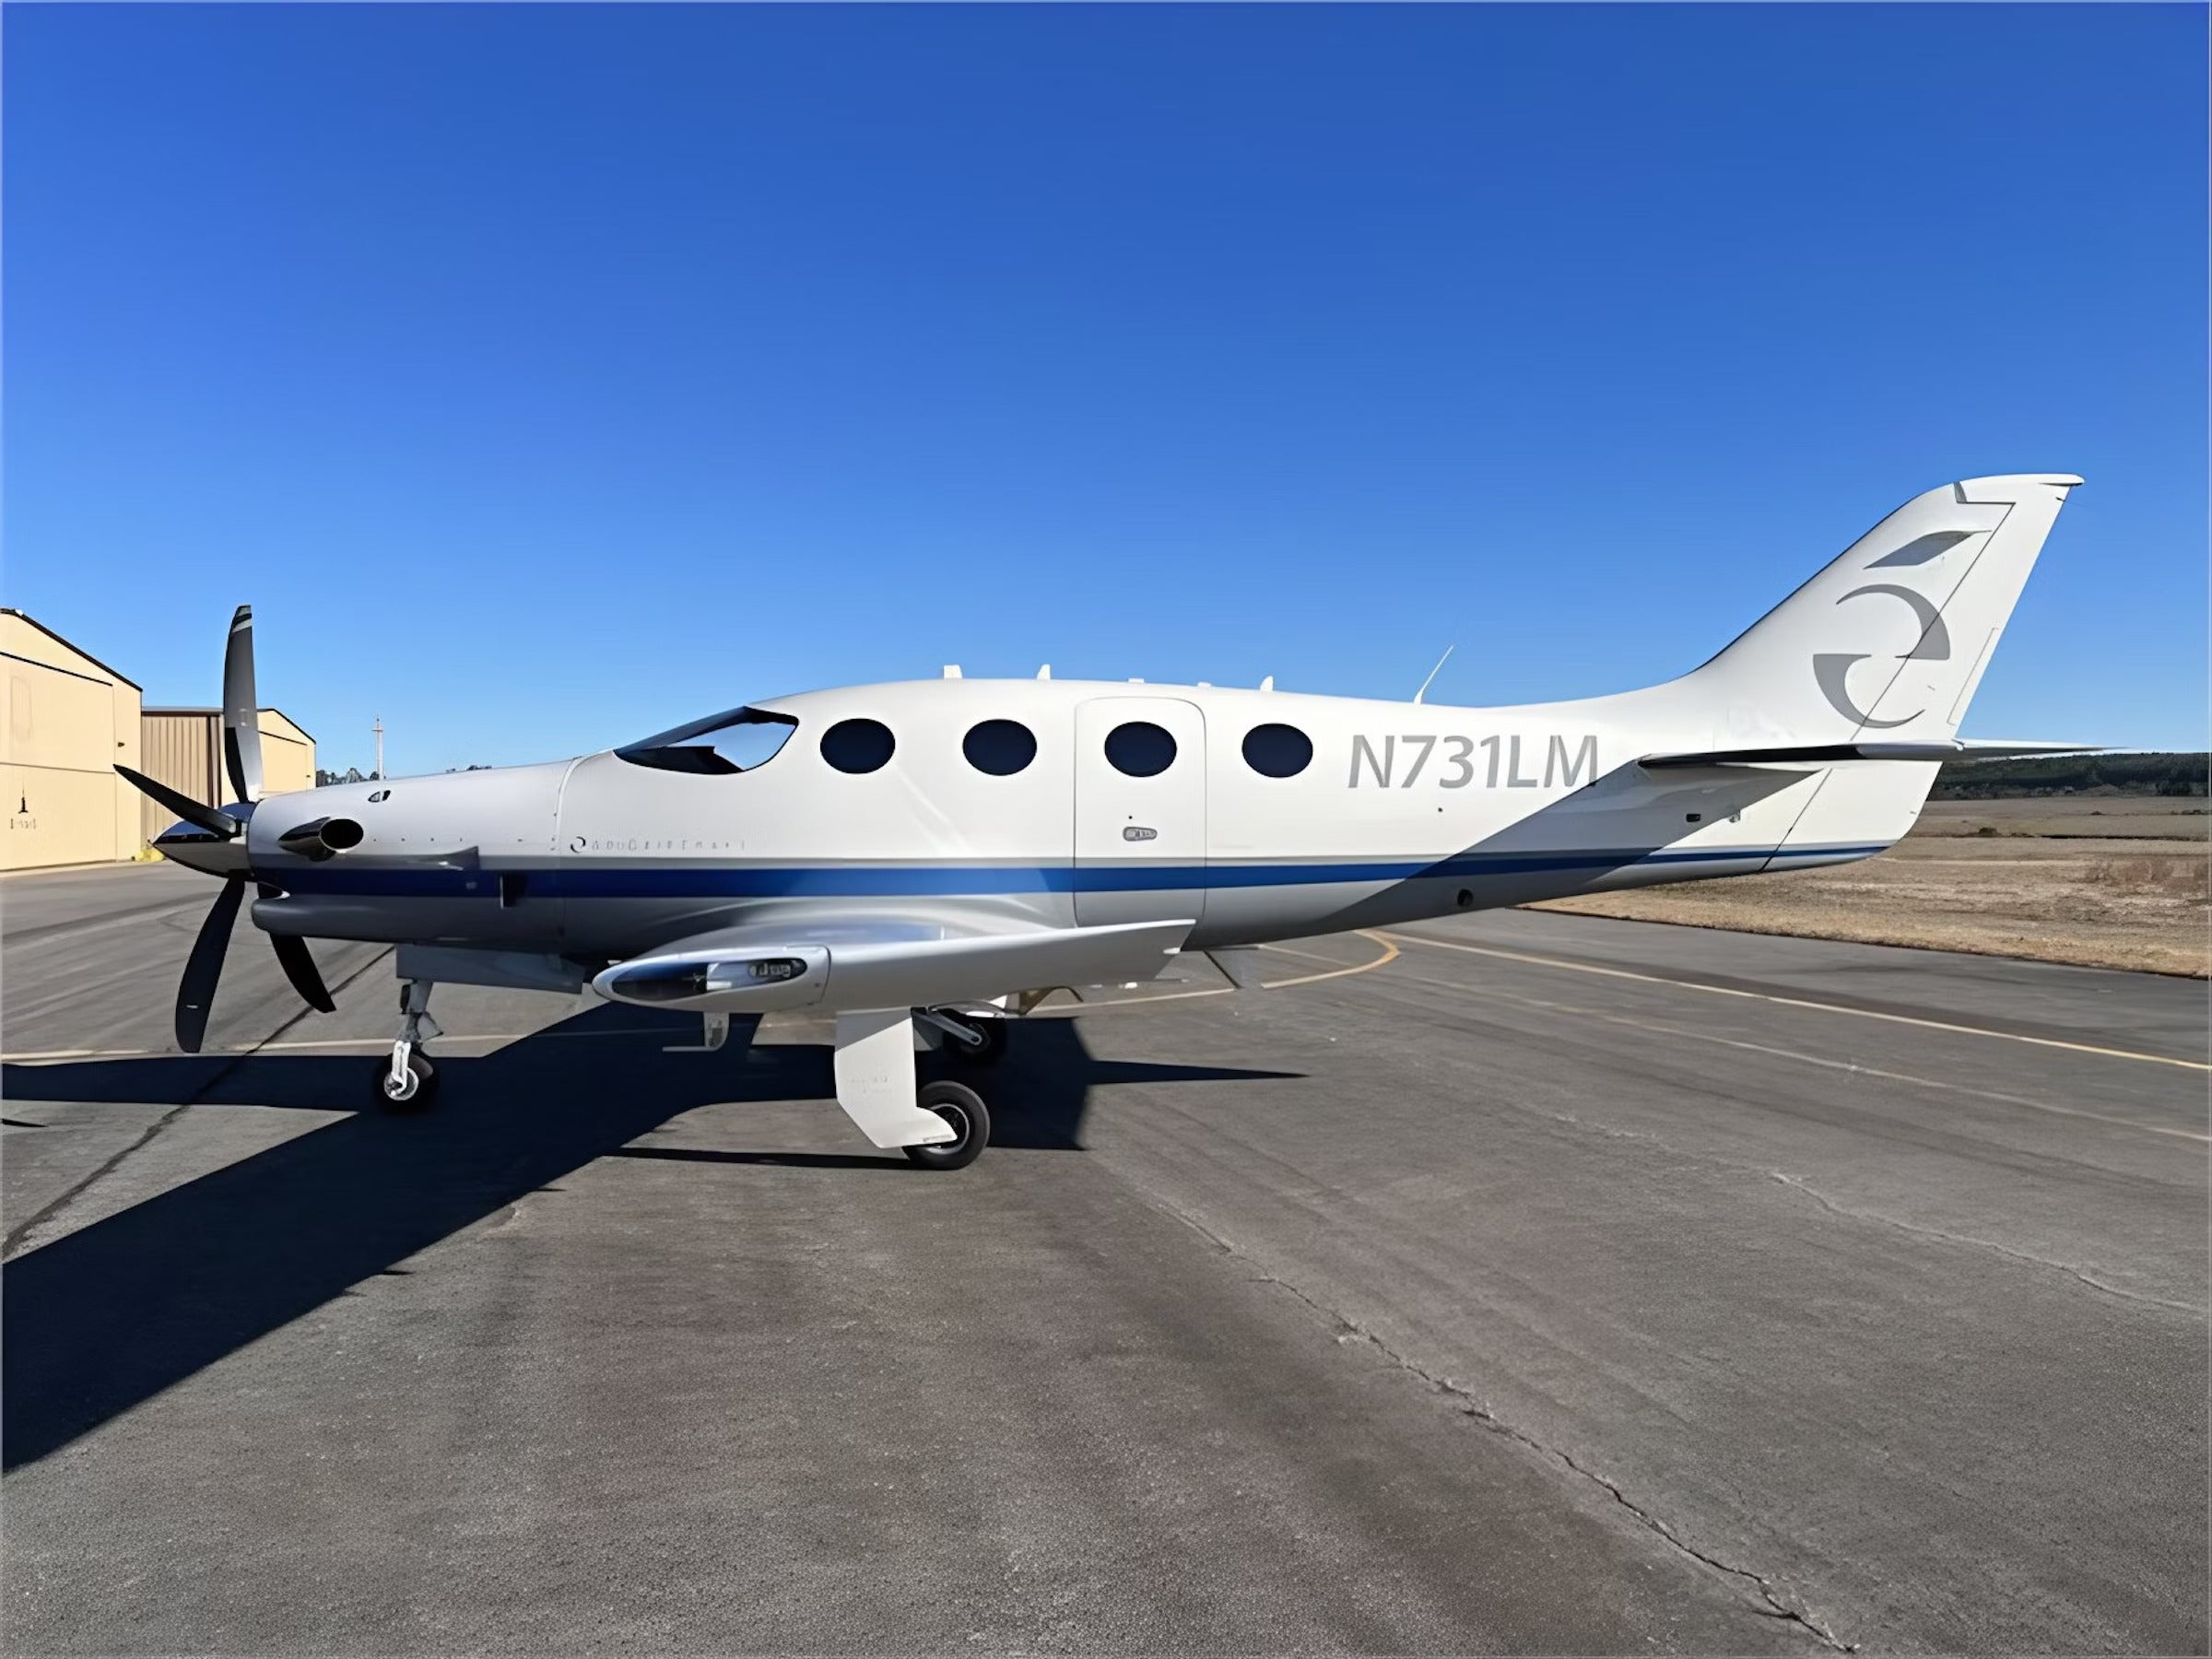 This 2022 Epic E1000 GX Is a Jet-Chasing ‘AircraftForSale’ Top Pick